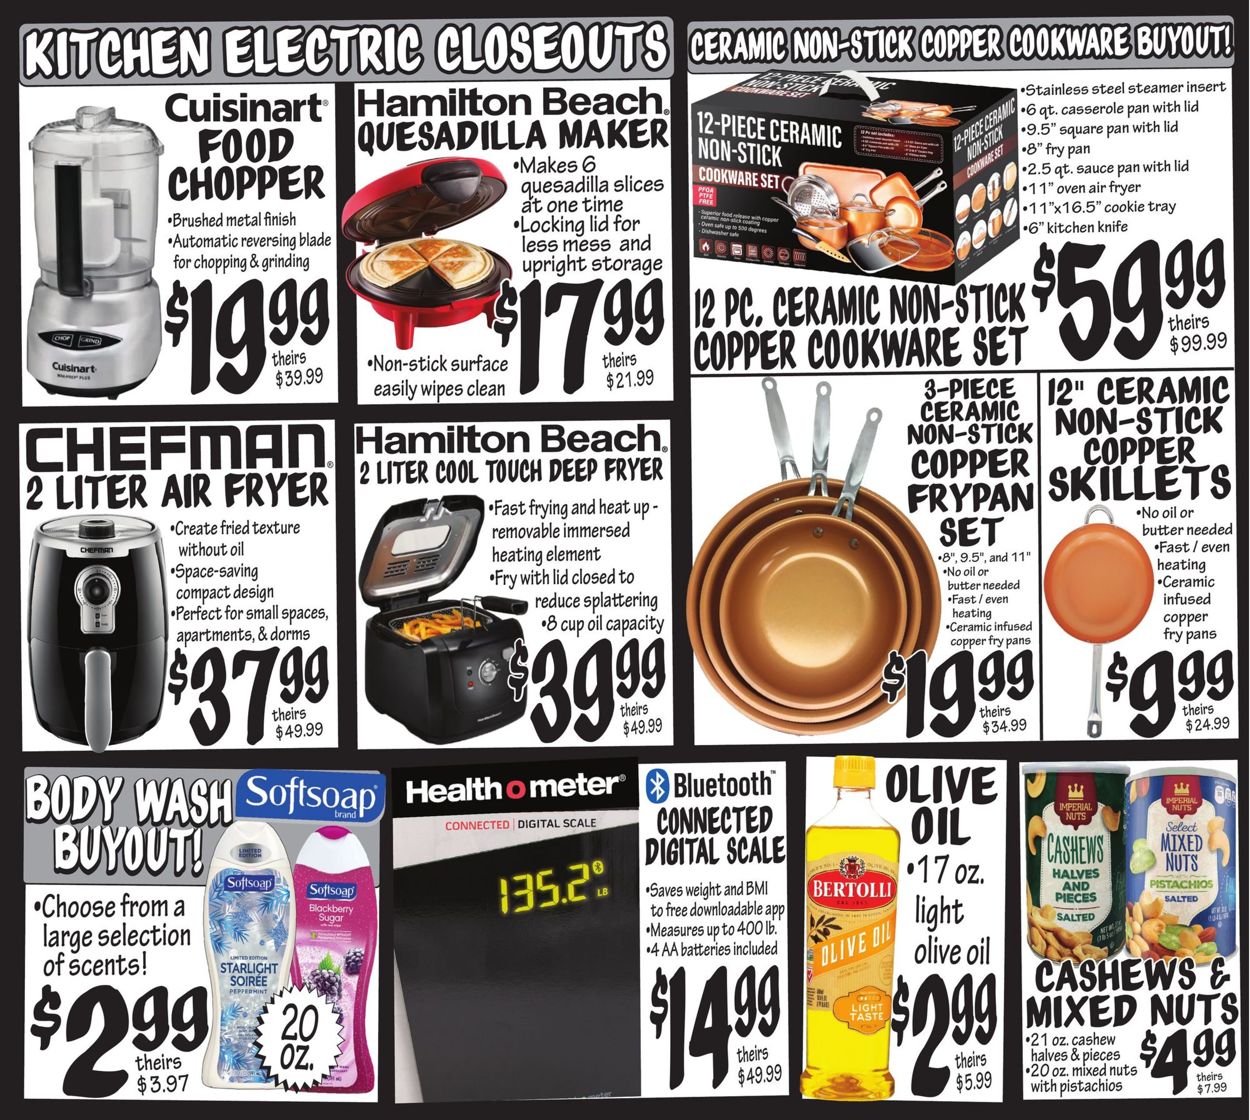 Ollie's Ad from 03/25/2021